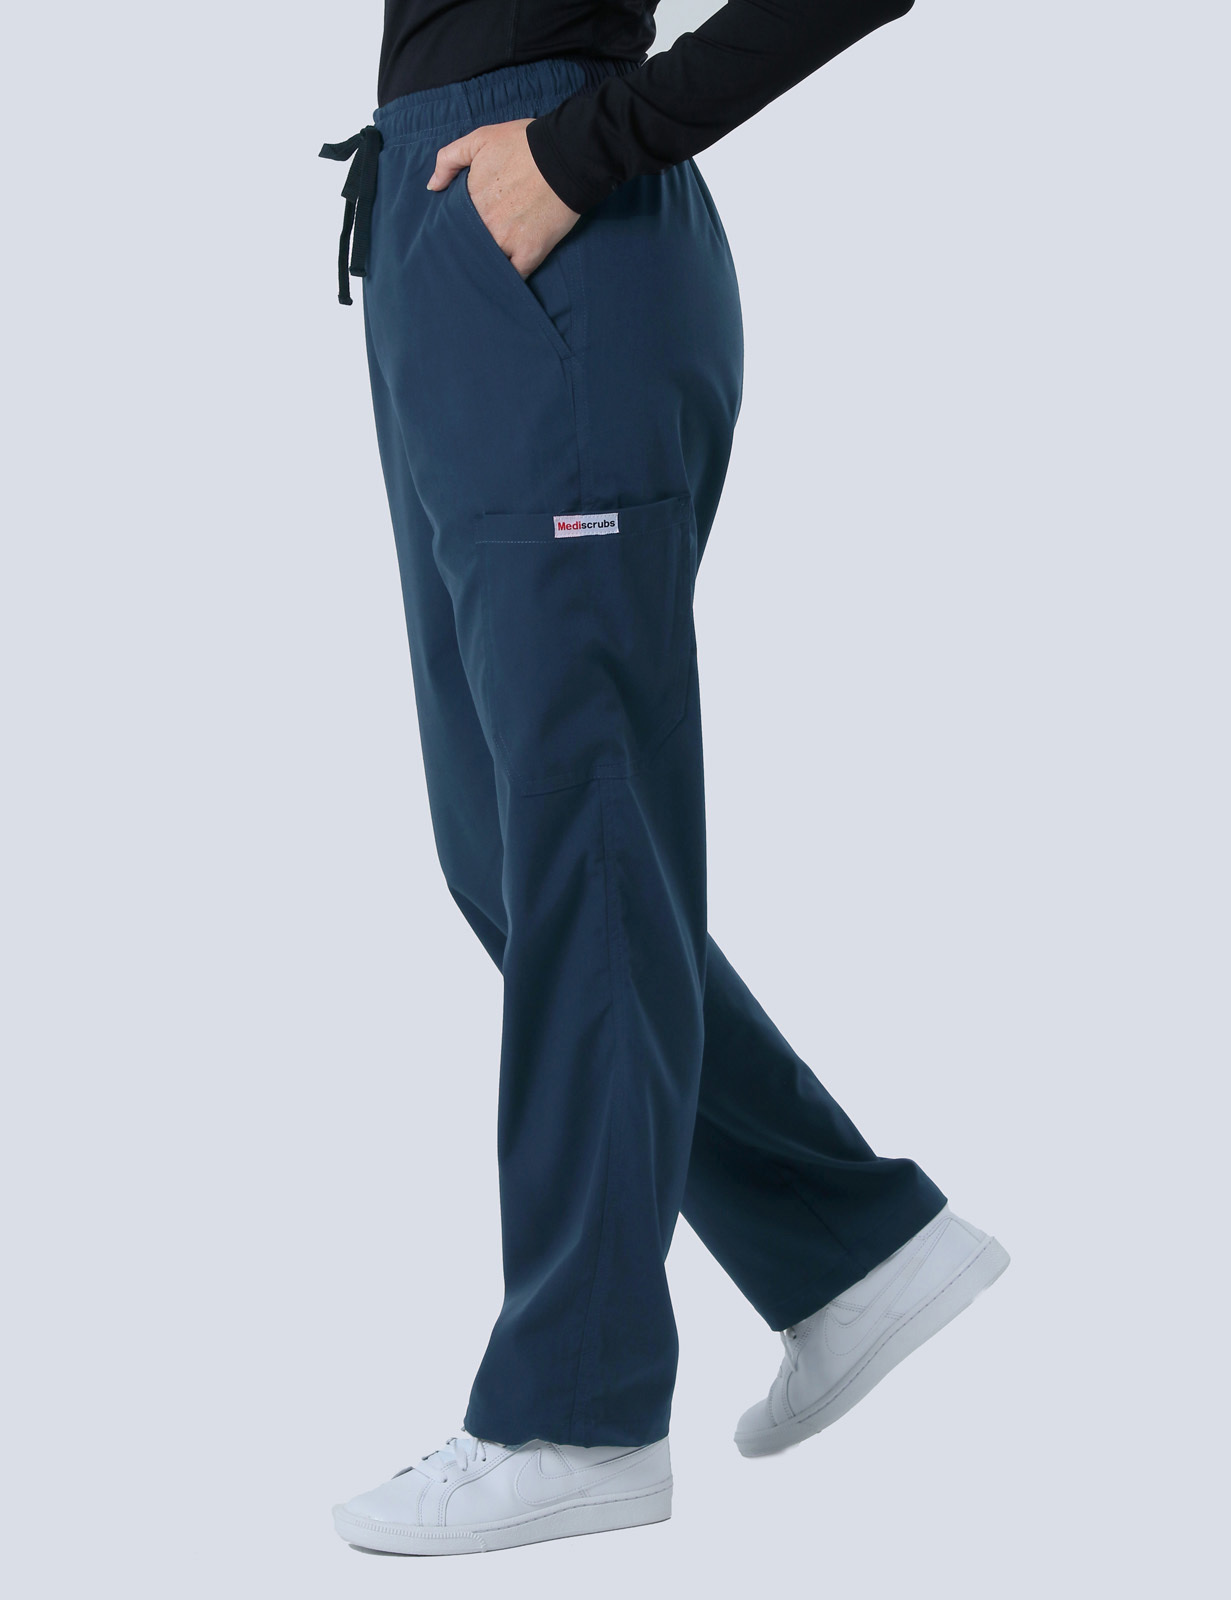 Melbourne Hospital - Wards CN (4 Pocket Scrub Top and Cargo Pants in Navy incl Logos)